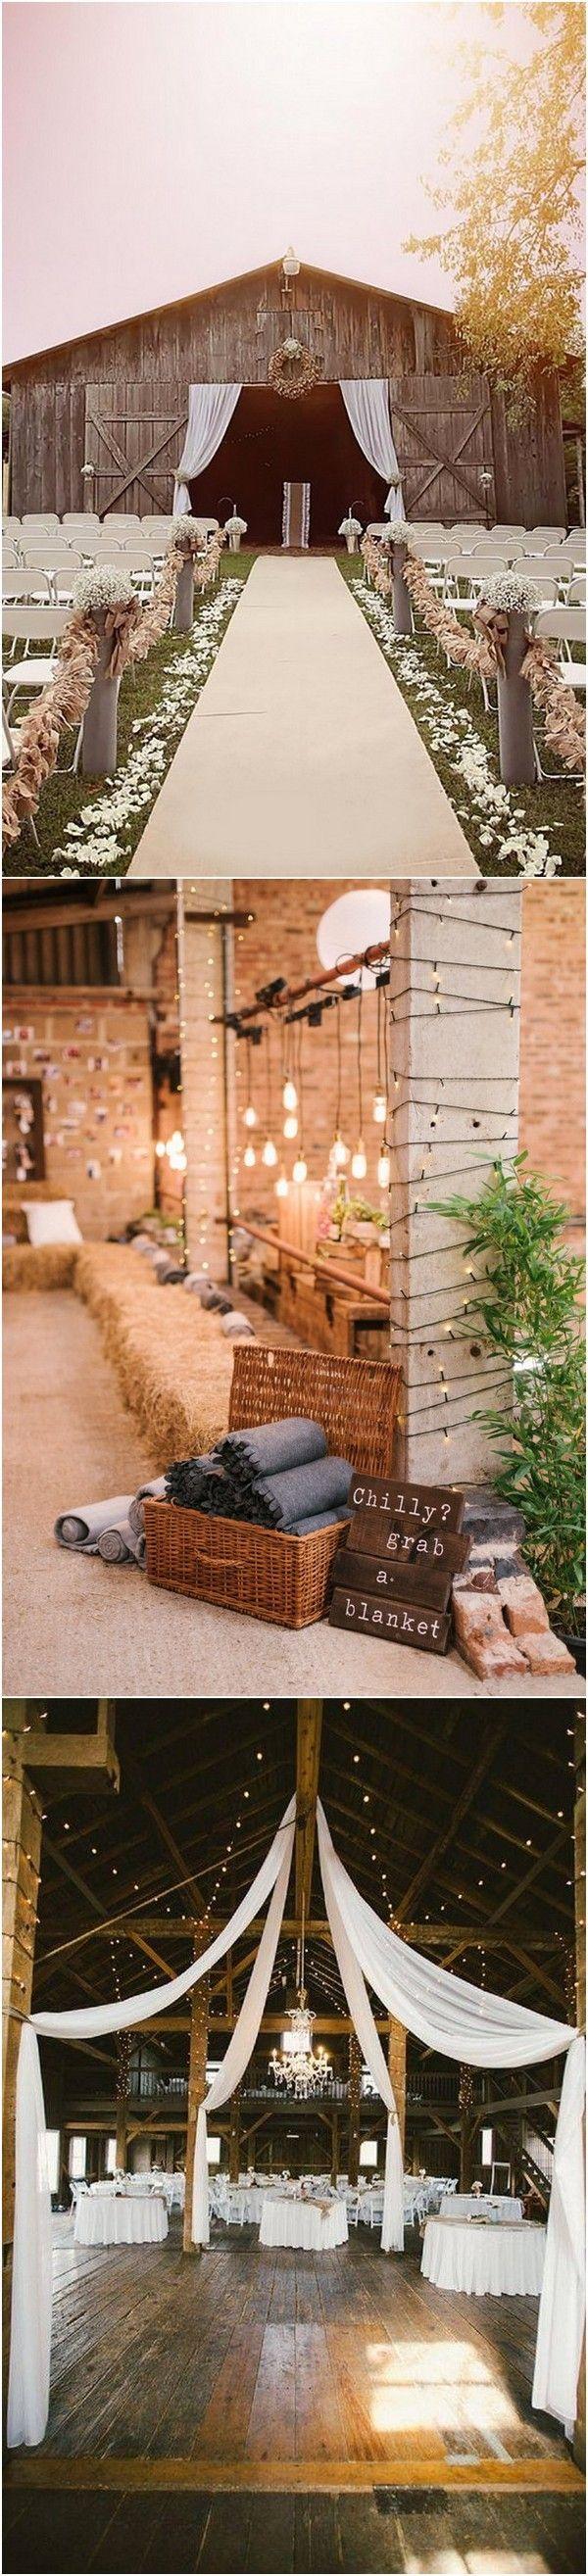 Hochzeit - 18 Perfect Country Rustic Barn Wedding Decoration Ideas - Page 2 Of 3